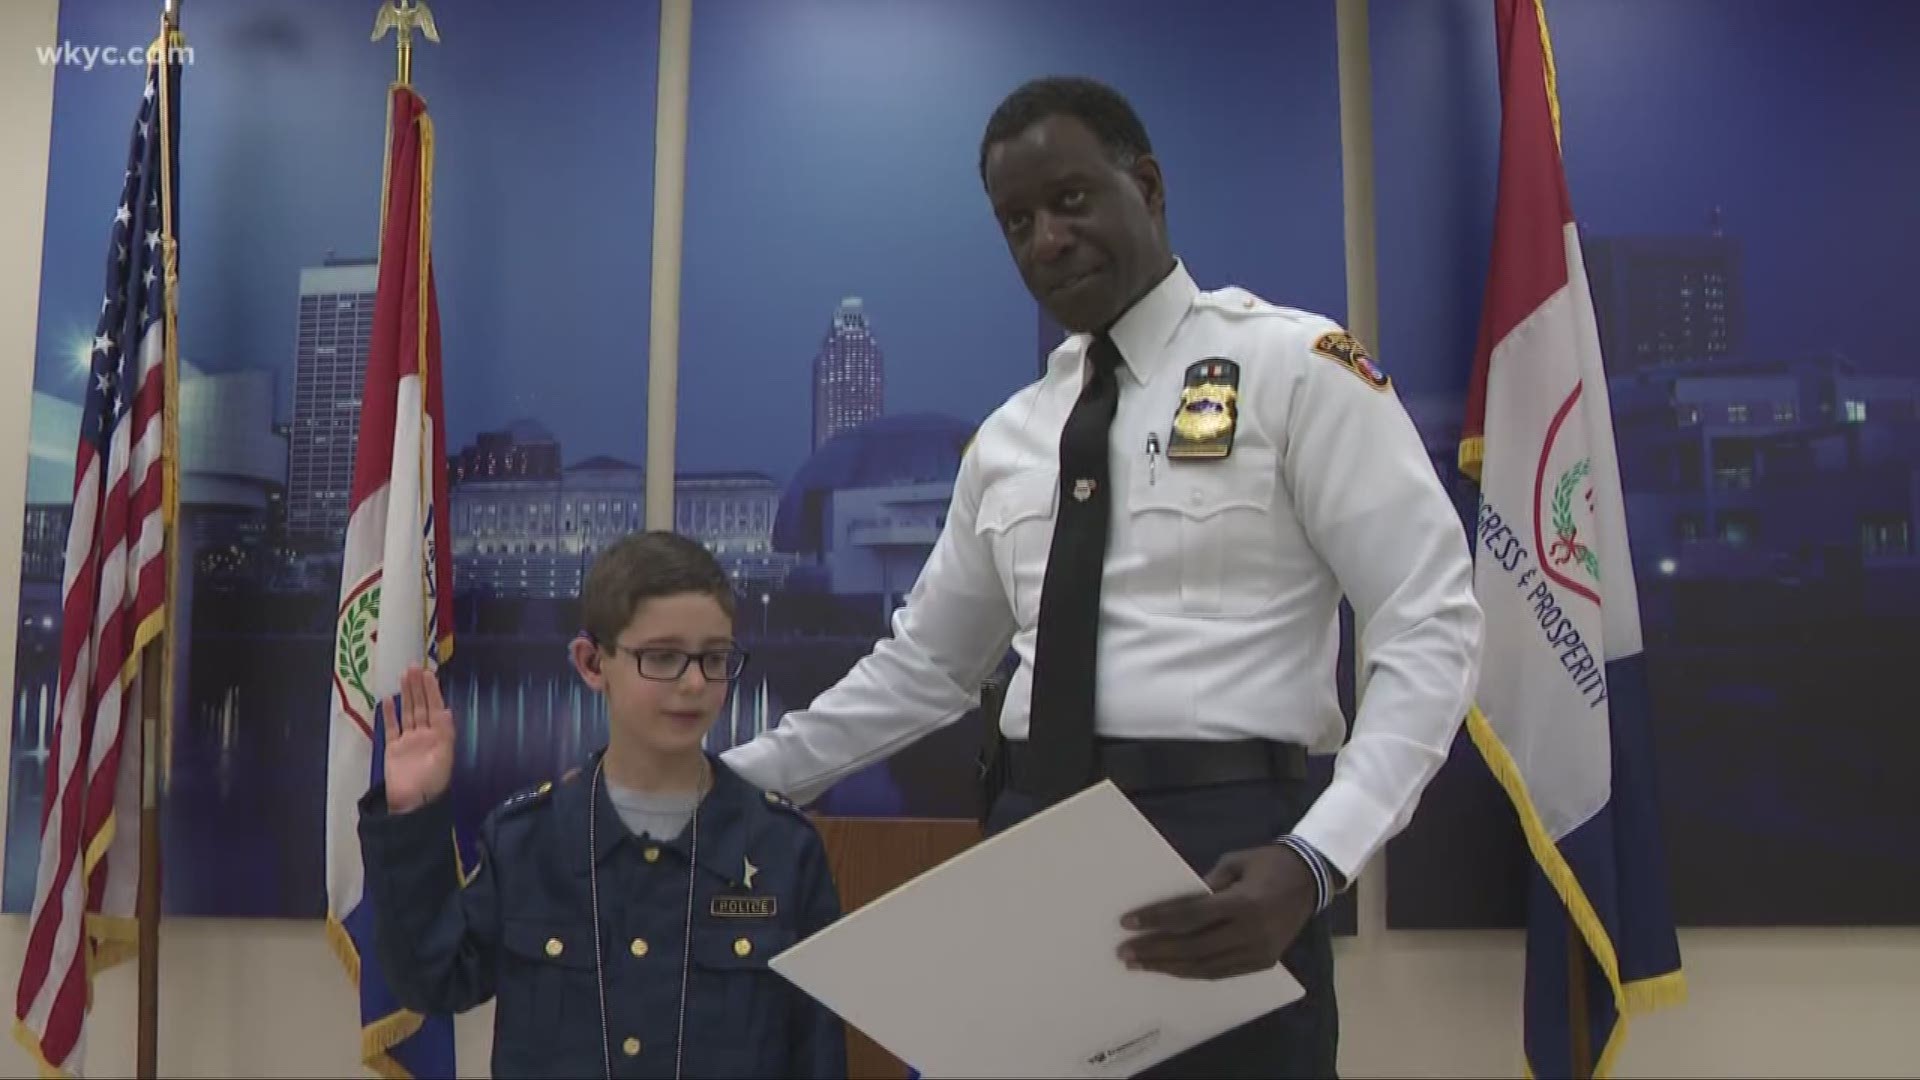 A little 8-year-old boy from Cleveland had a lifelong dream realized.